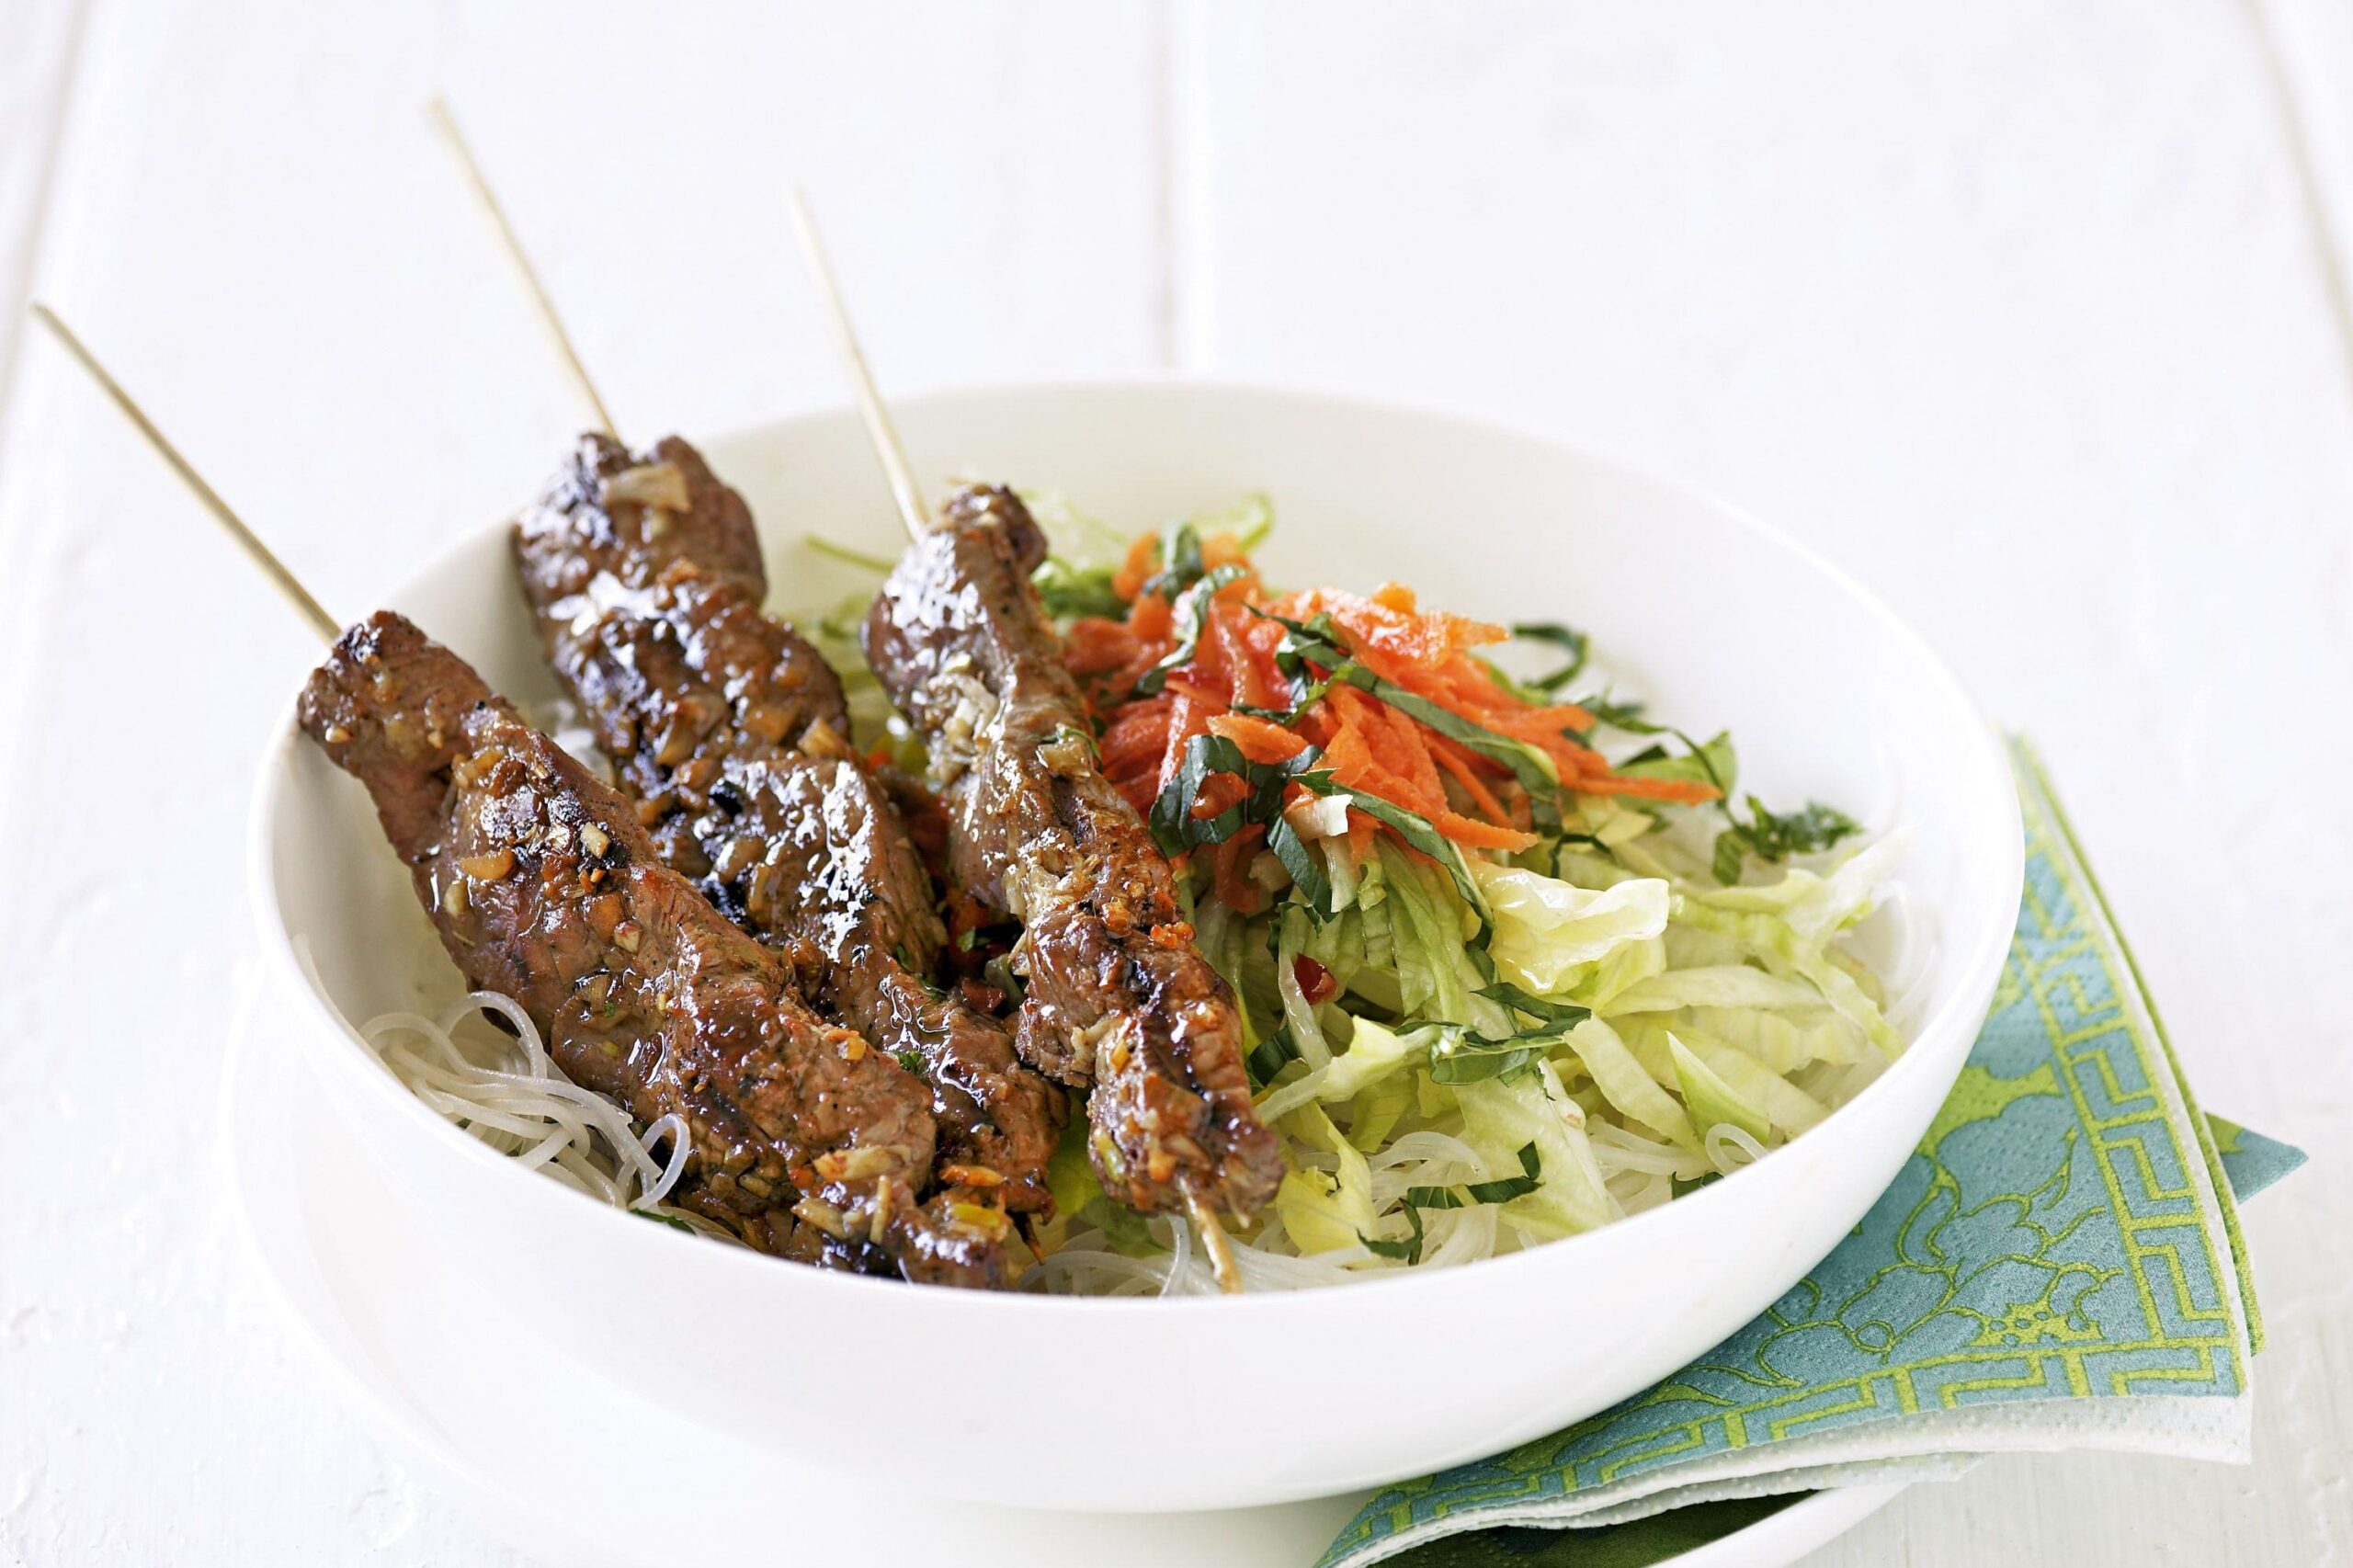  The secret to tender and juicy beef? Marinating it in a Vietnamese-inspired sauce.